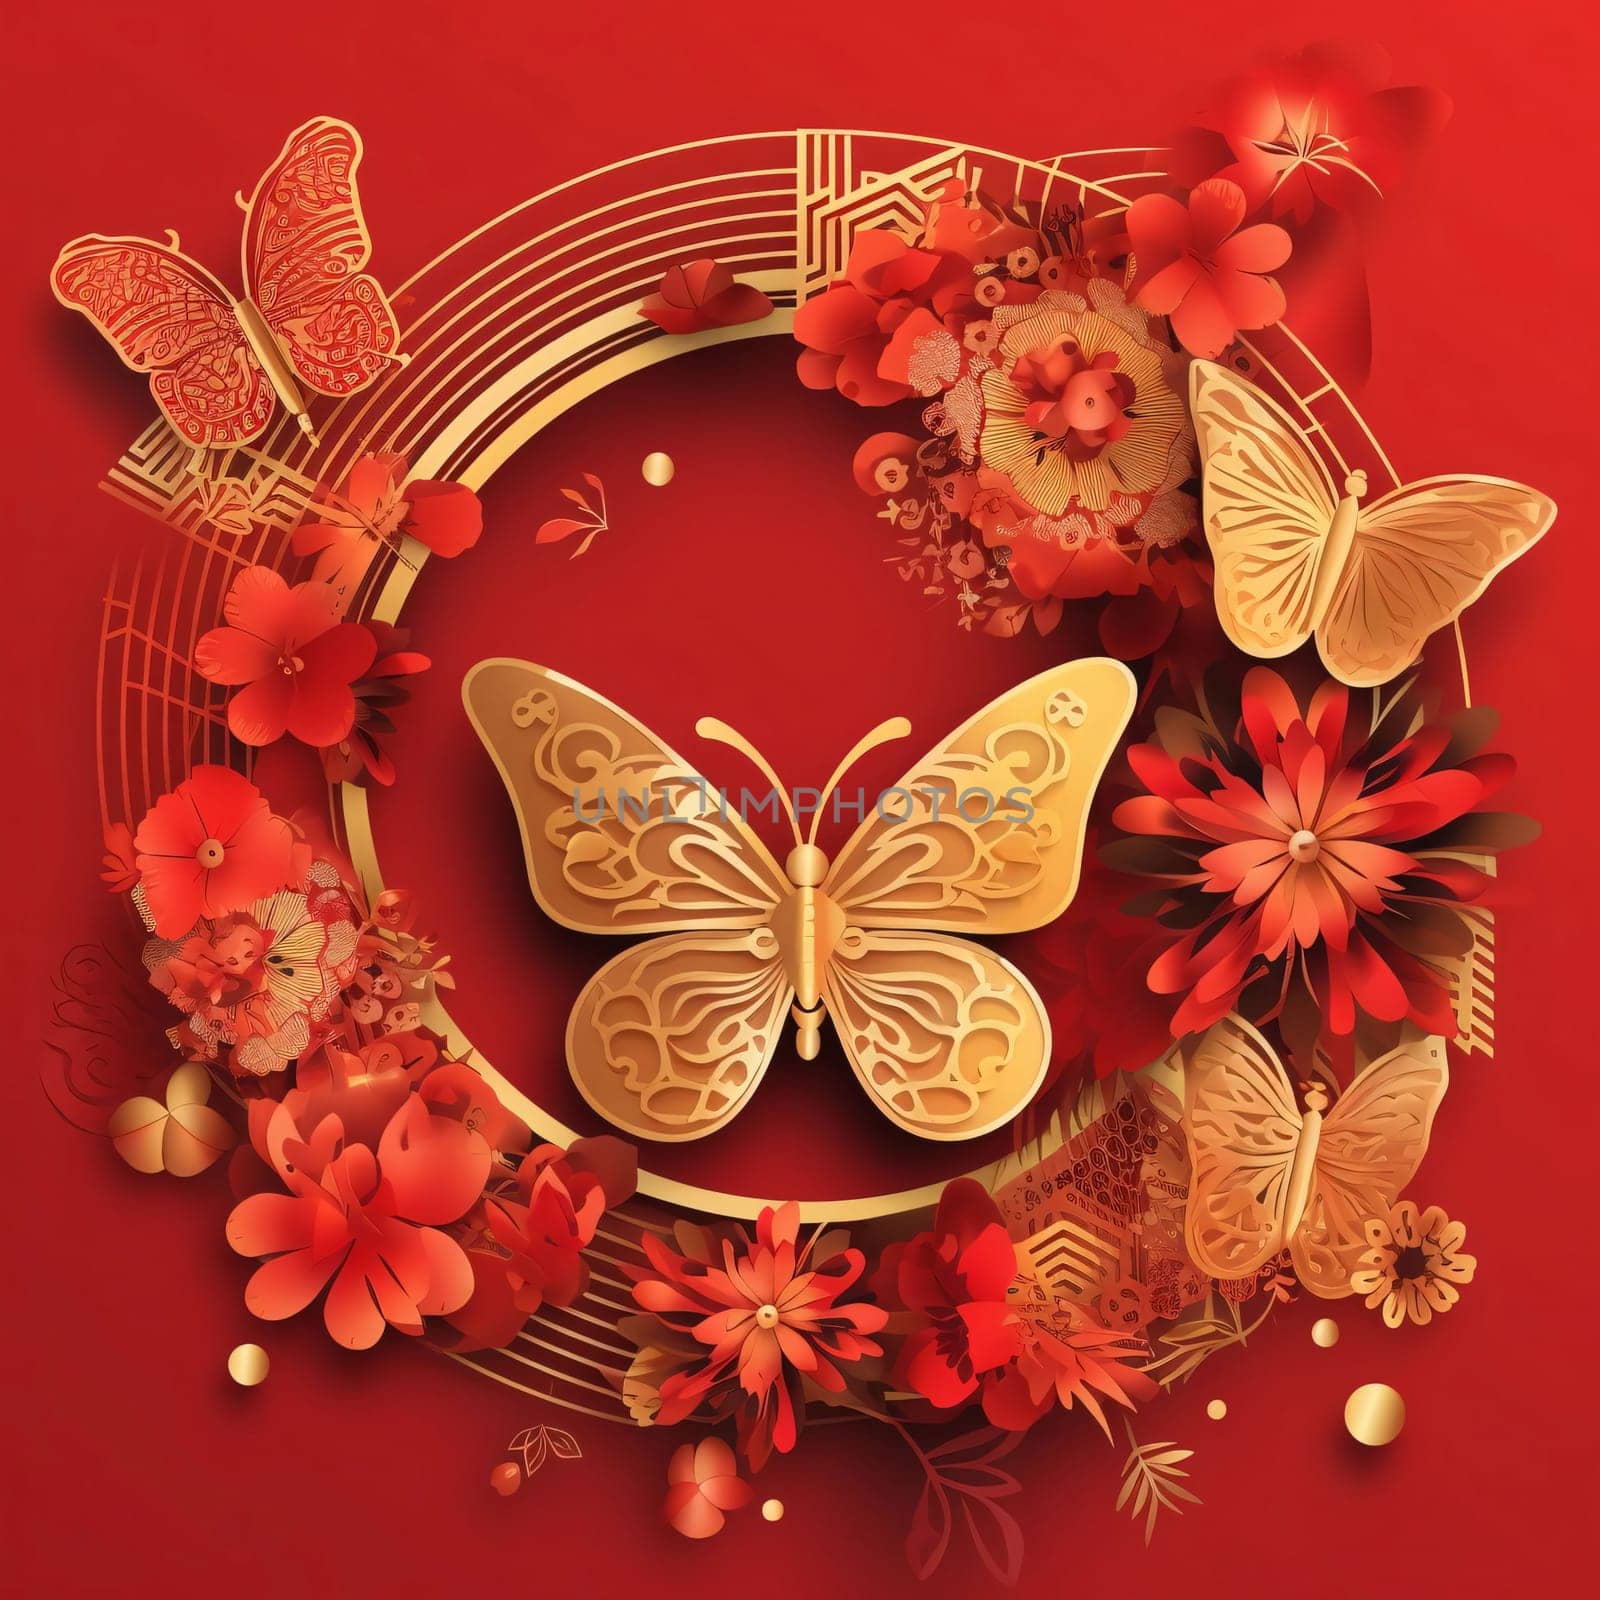 Gold butterflies in a circle decoration with red flowers, red background. Chinese New Year celebrations. A time of celebration and resolutions.